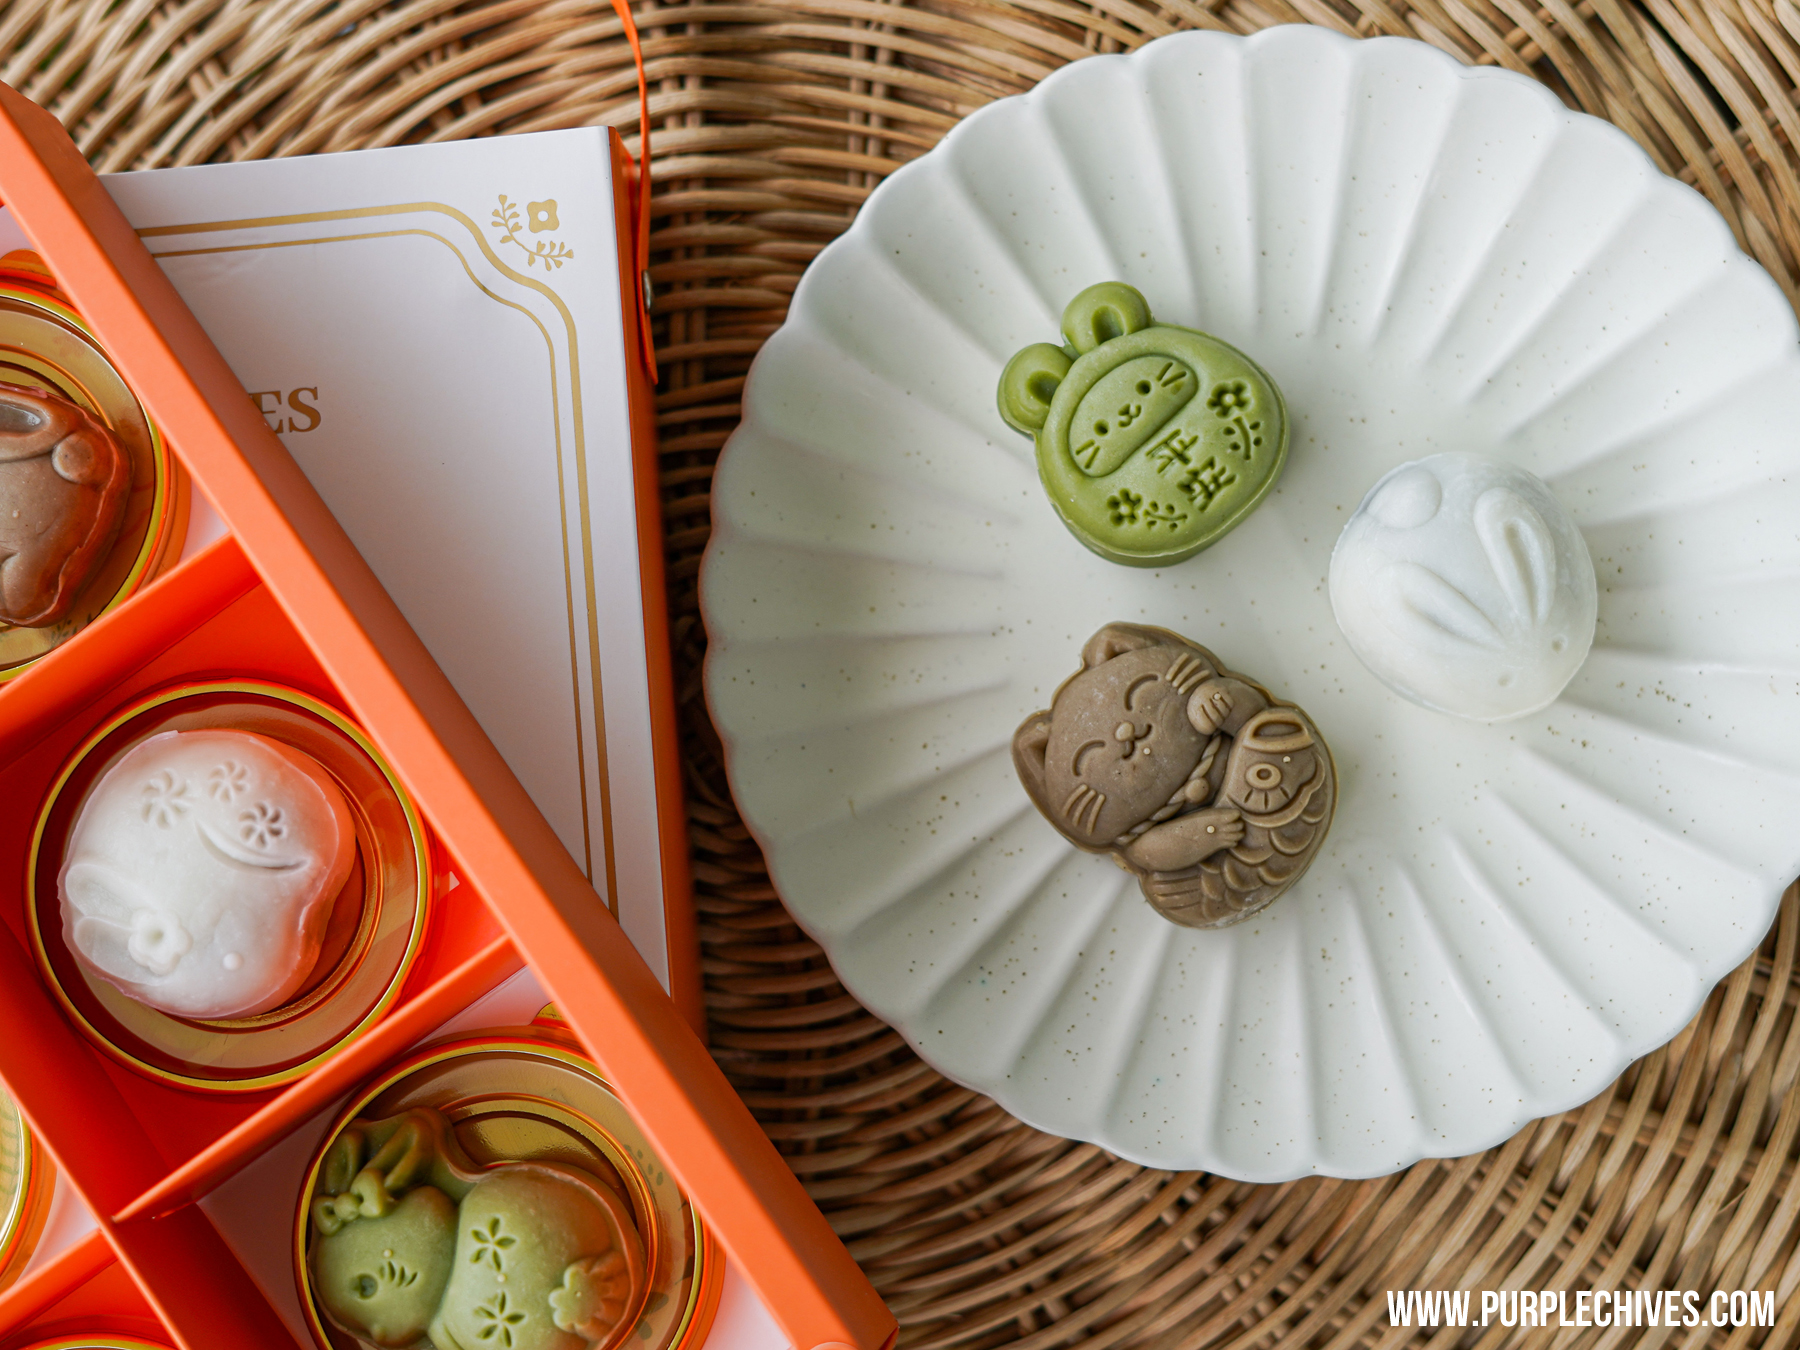 2017 Featured Mid-Autumn Festival Mooncake Gift Box and Sets